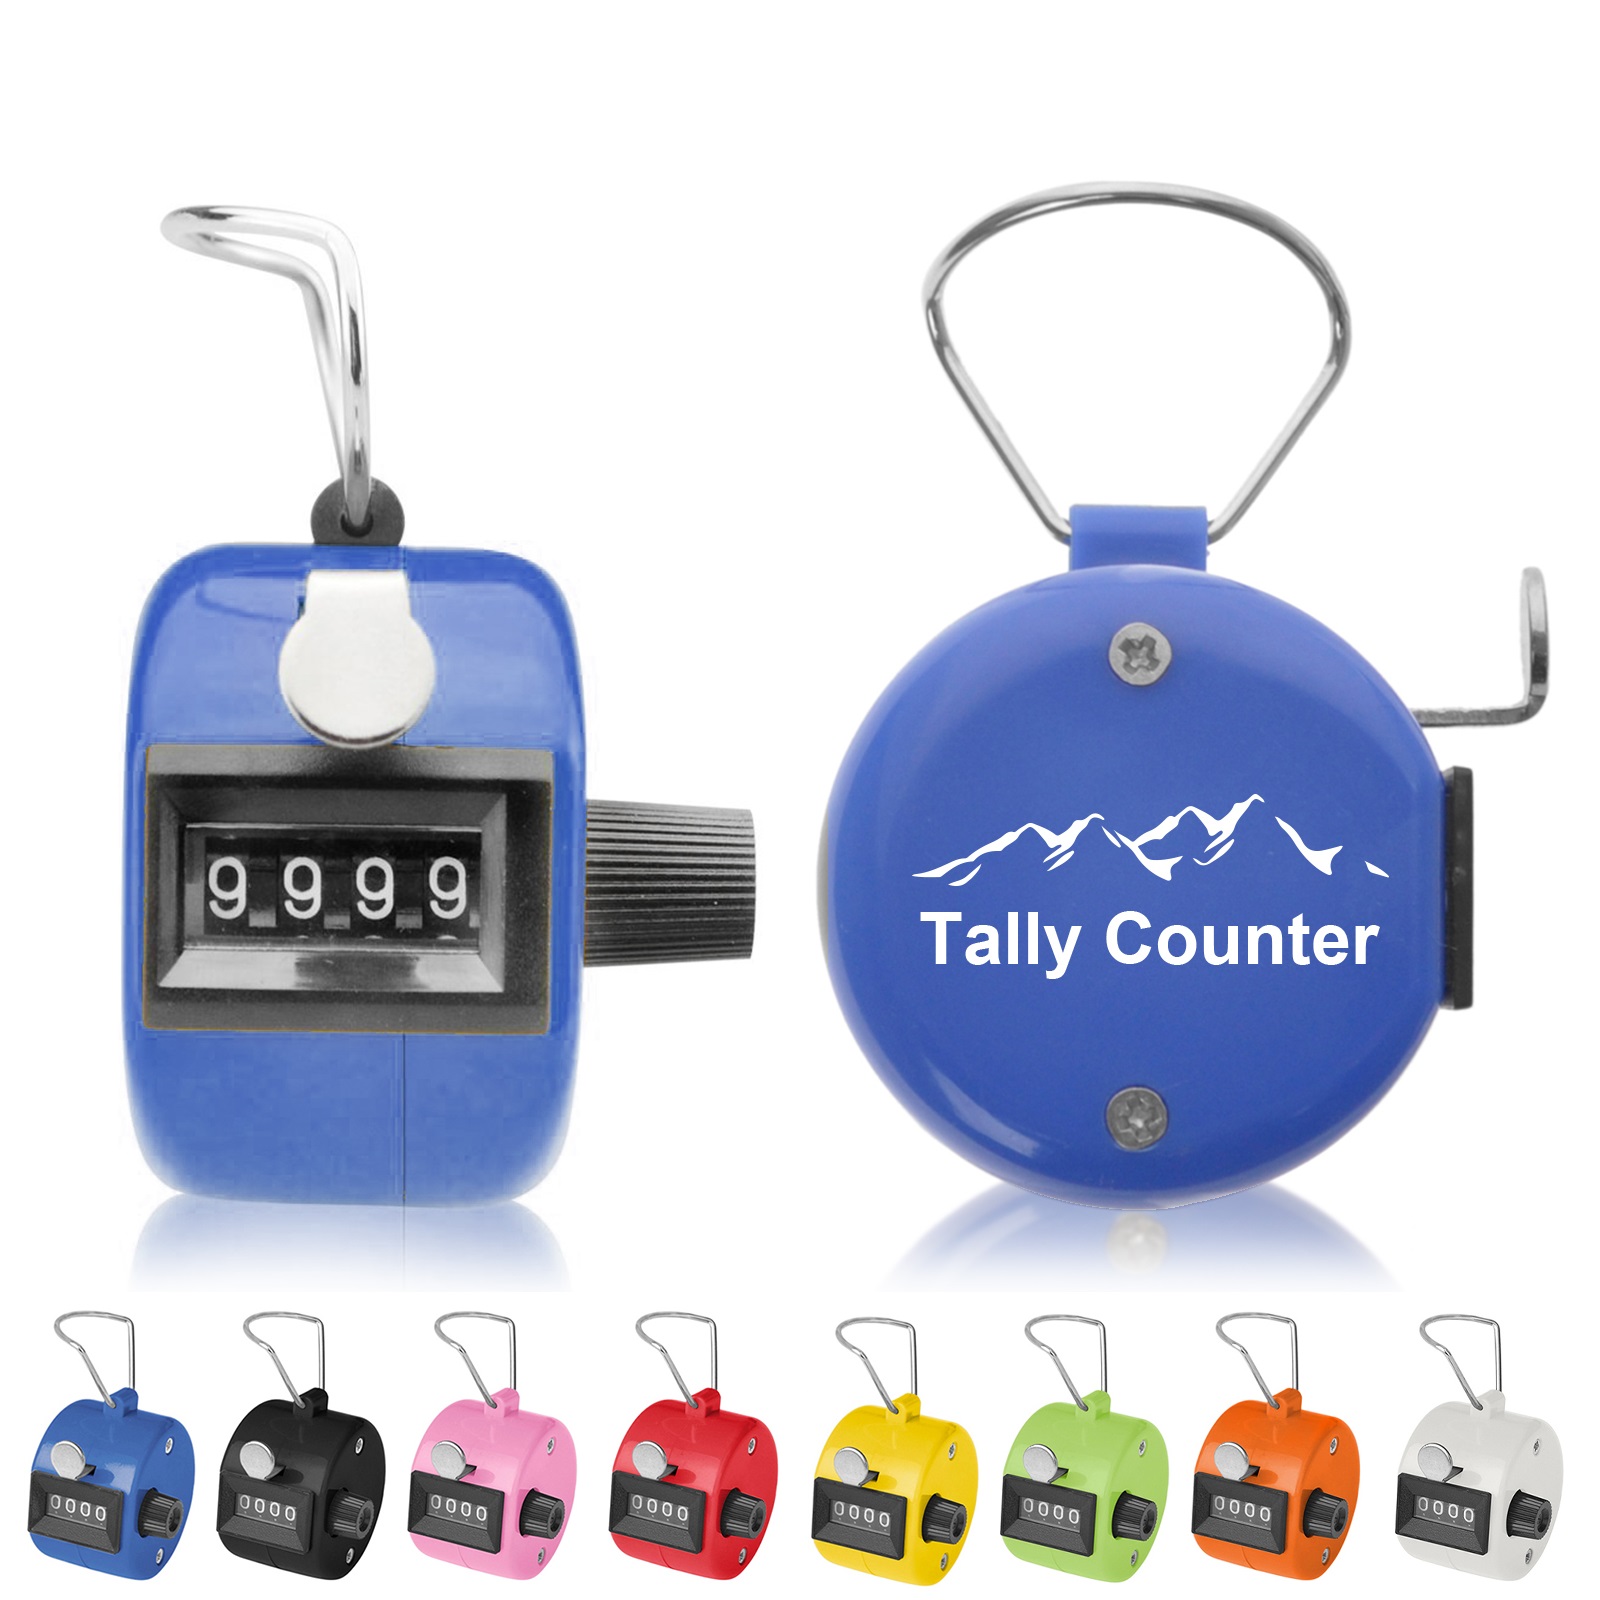 Golf Pitch 4 Digit Number Clicker Hand Held Tally Counter Black Yellow